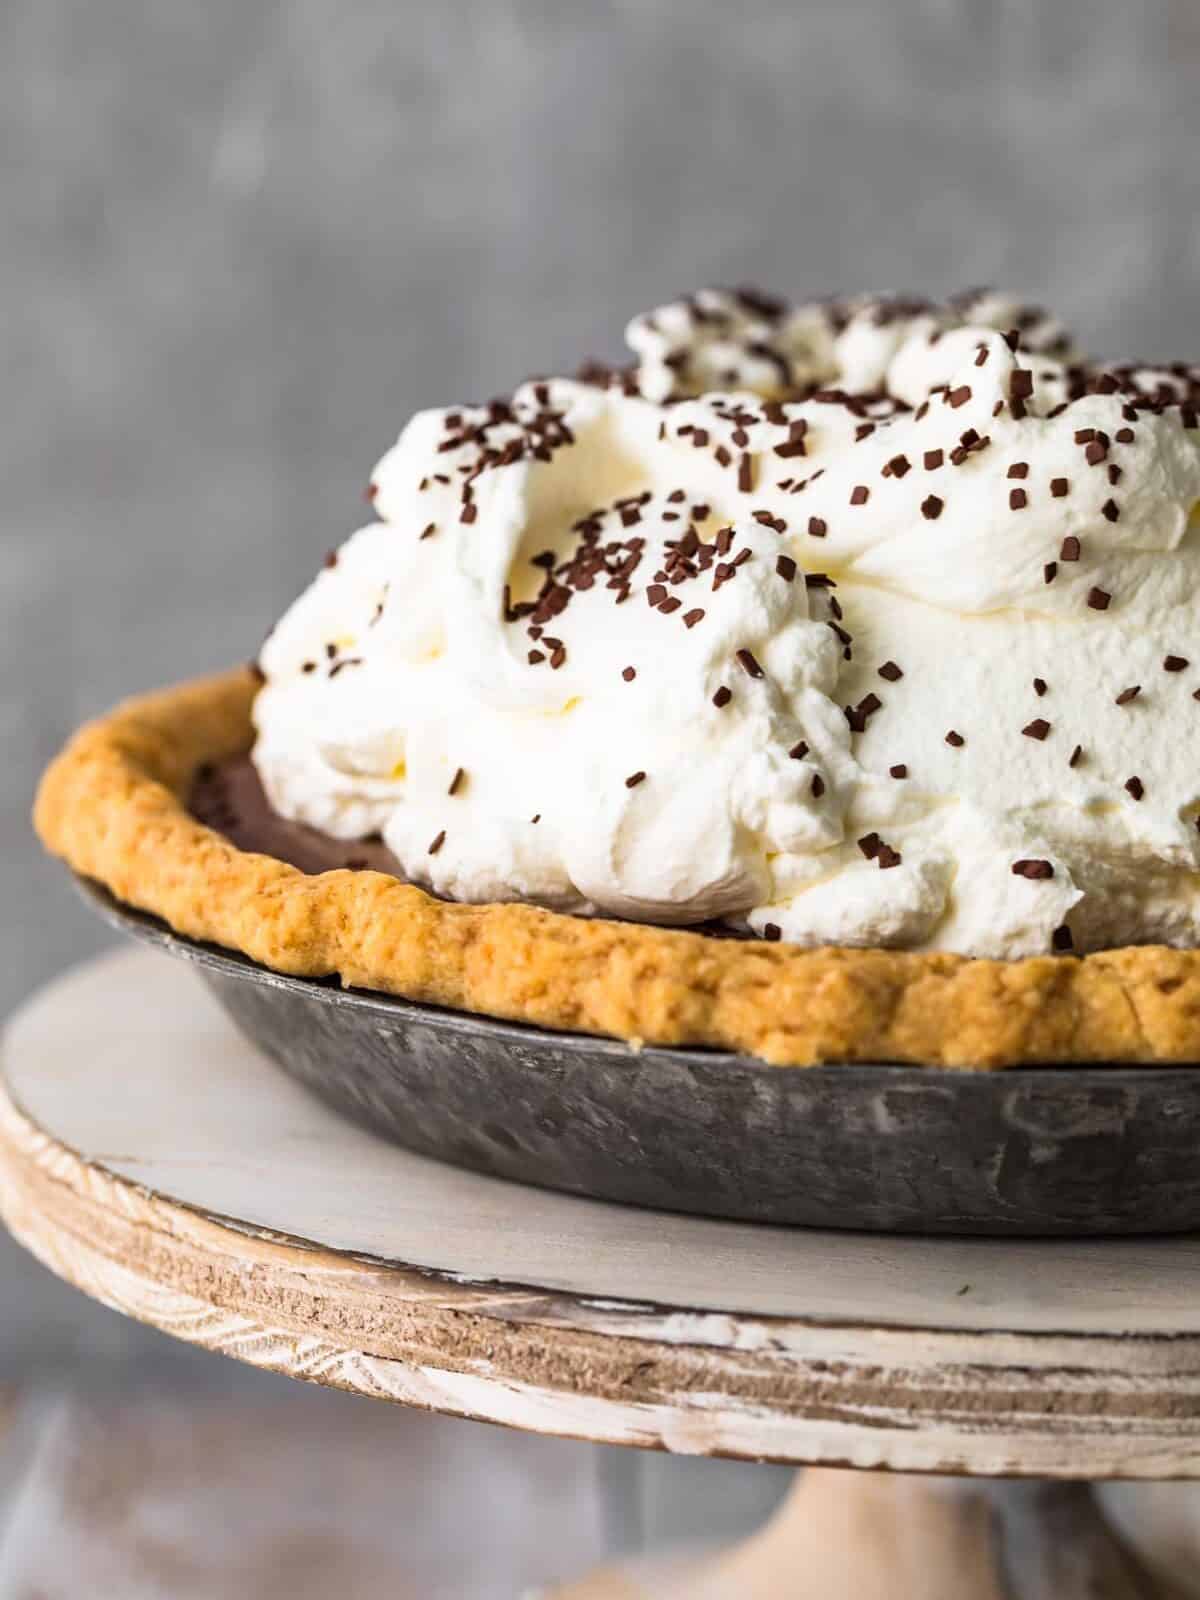 Best chocolate pie with whipped cream.